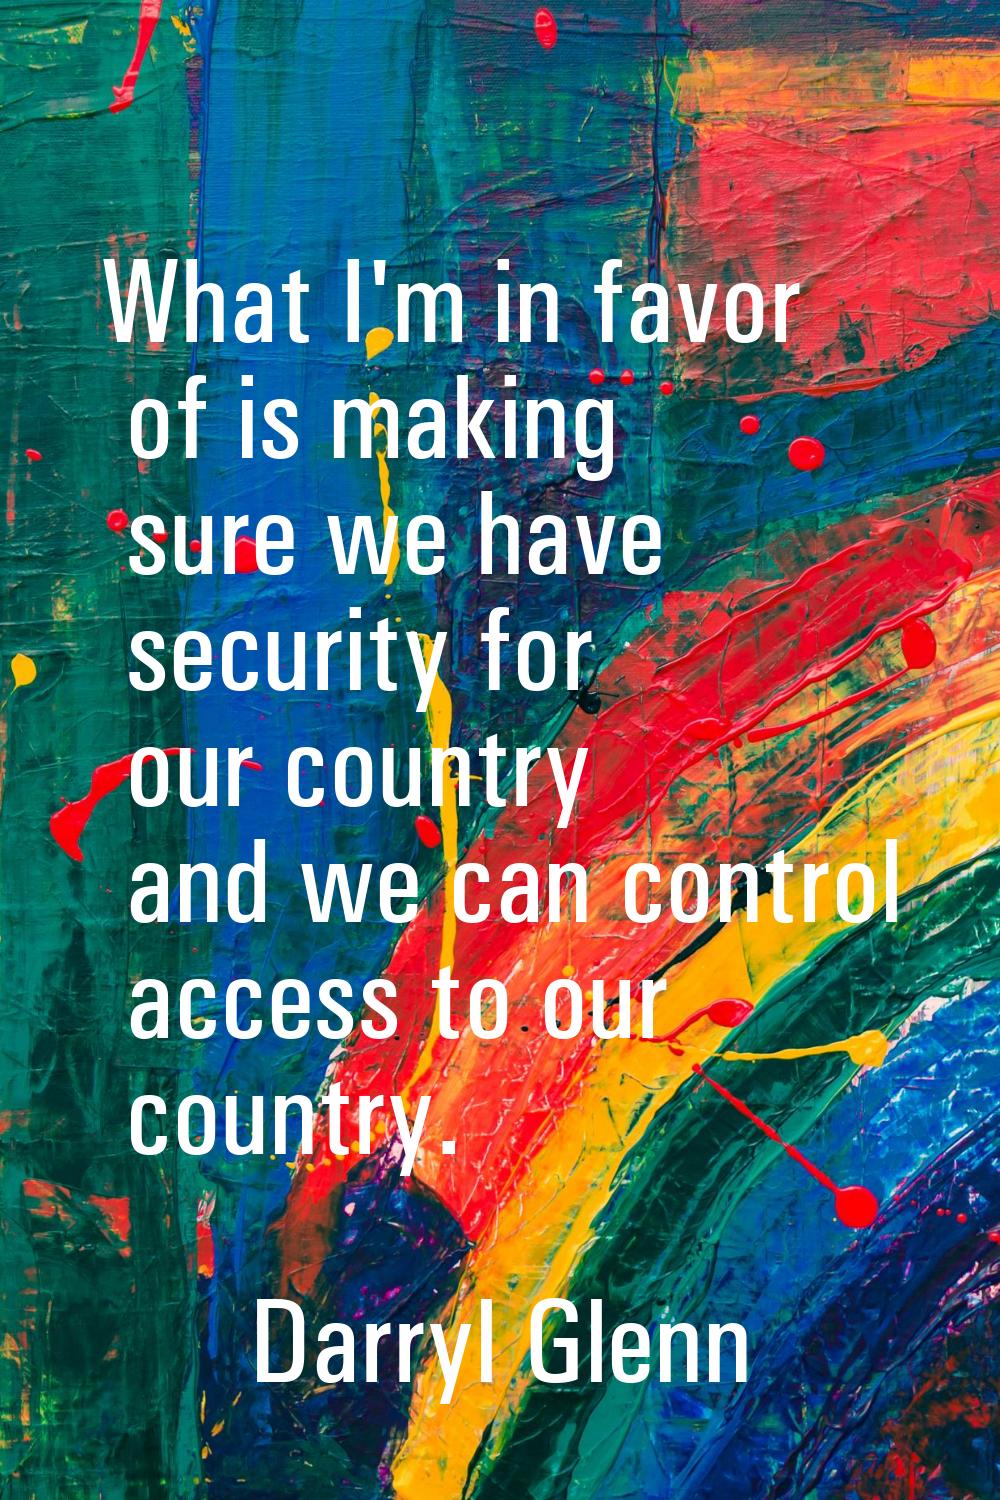 What I'm in favor of is making sure we have security for our country and we can control access to o